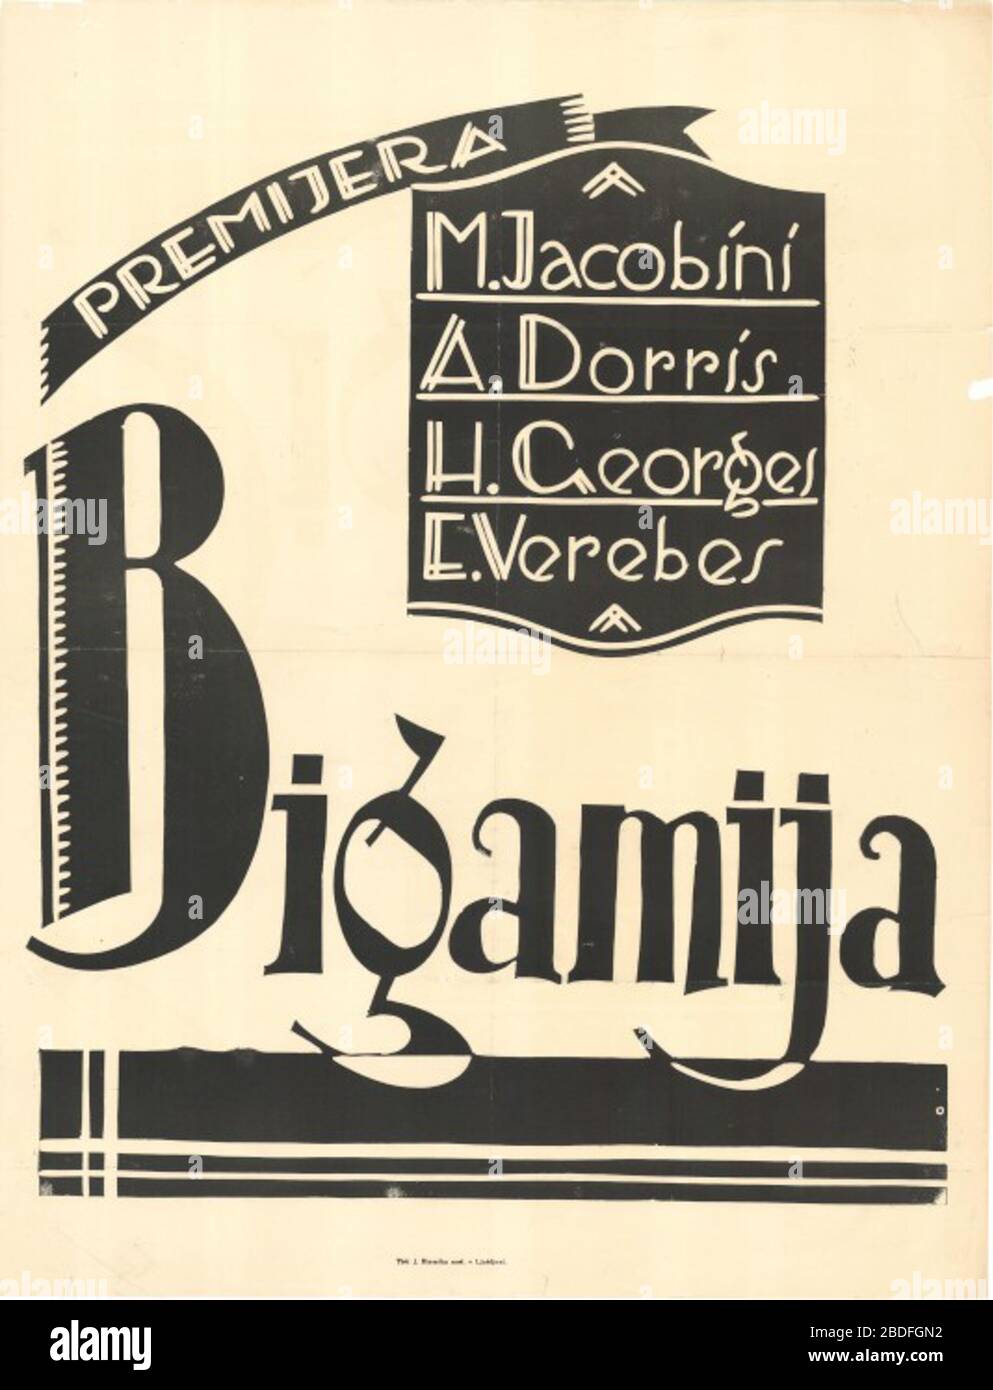 'Slovenščina: Plakat za film Bigamija; 1930; This image is available from the Digital Library of Slovenia under the reference number BAKWNTTM  This tag does not indicate the copyright status of the attached work. A normal copyright tag is still required. See Commons:Licensing for more information. Deutsch | English | español | italiano | македонски | polski | português | slovenščina | +/−; Unknown author; ' Stock Photo